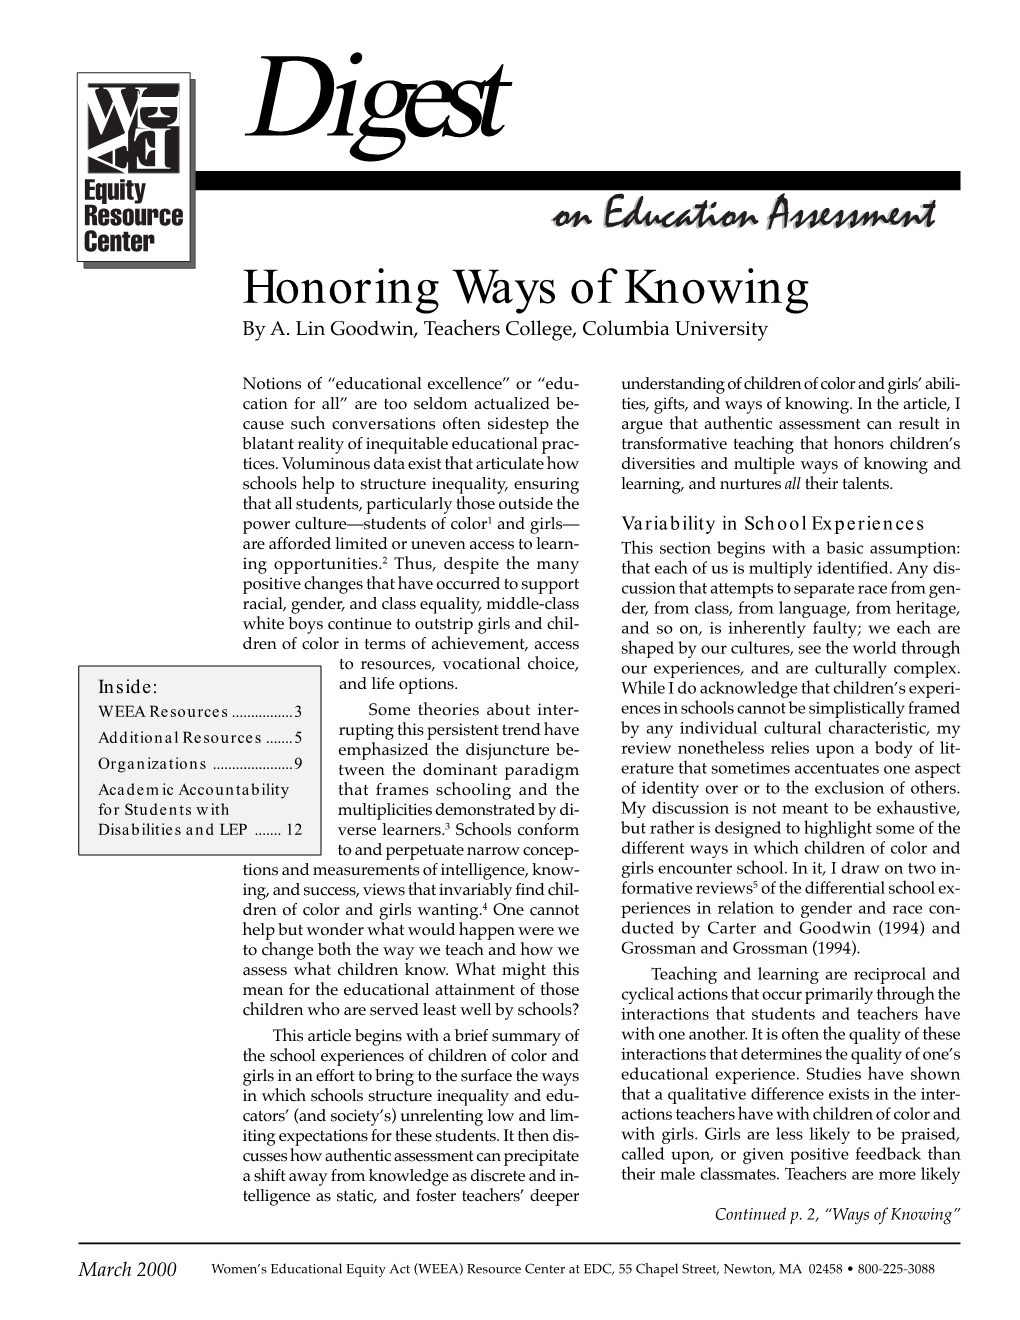 Education Assessment: Honoring Ways of Knowing